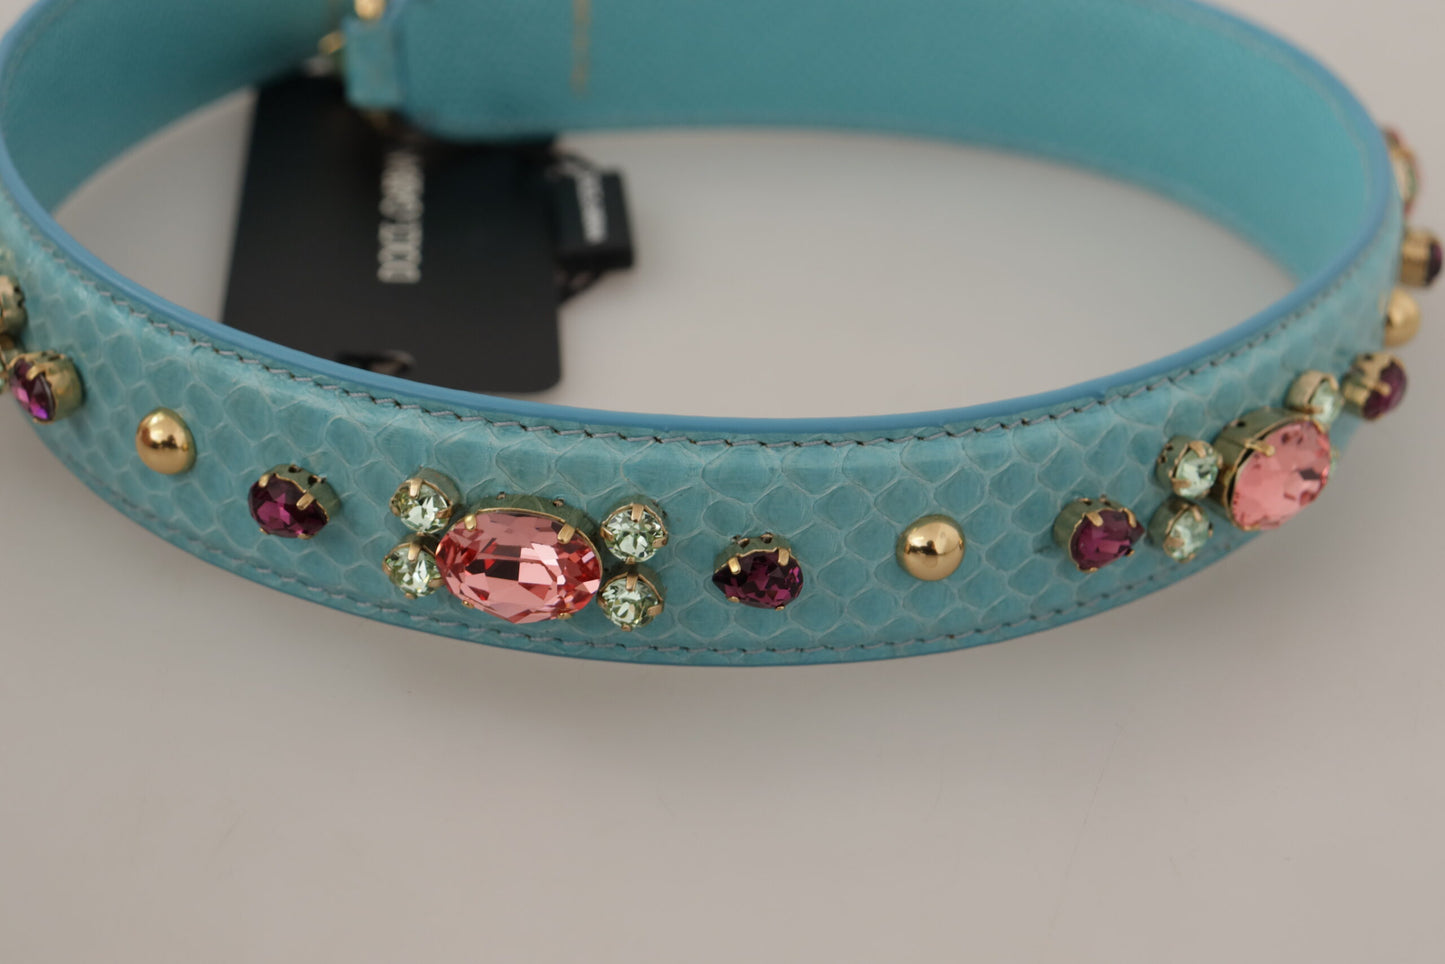 Blue Crystals Leather Bag Shoulder Strap - Designed by Dolce & Gabbana Available to Buy at a Discounted Price on Moon Behind The Hill Online Designer Discount Store